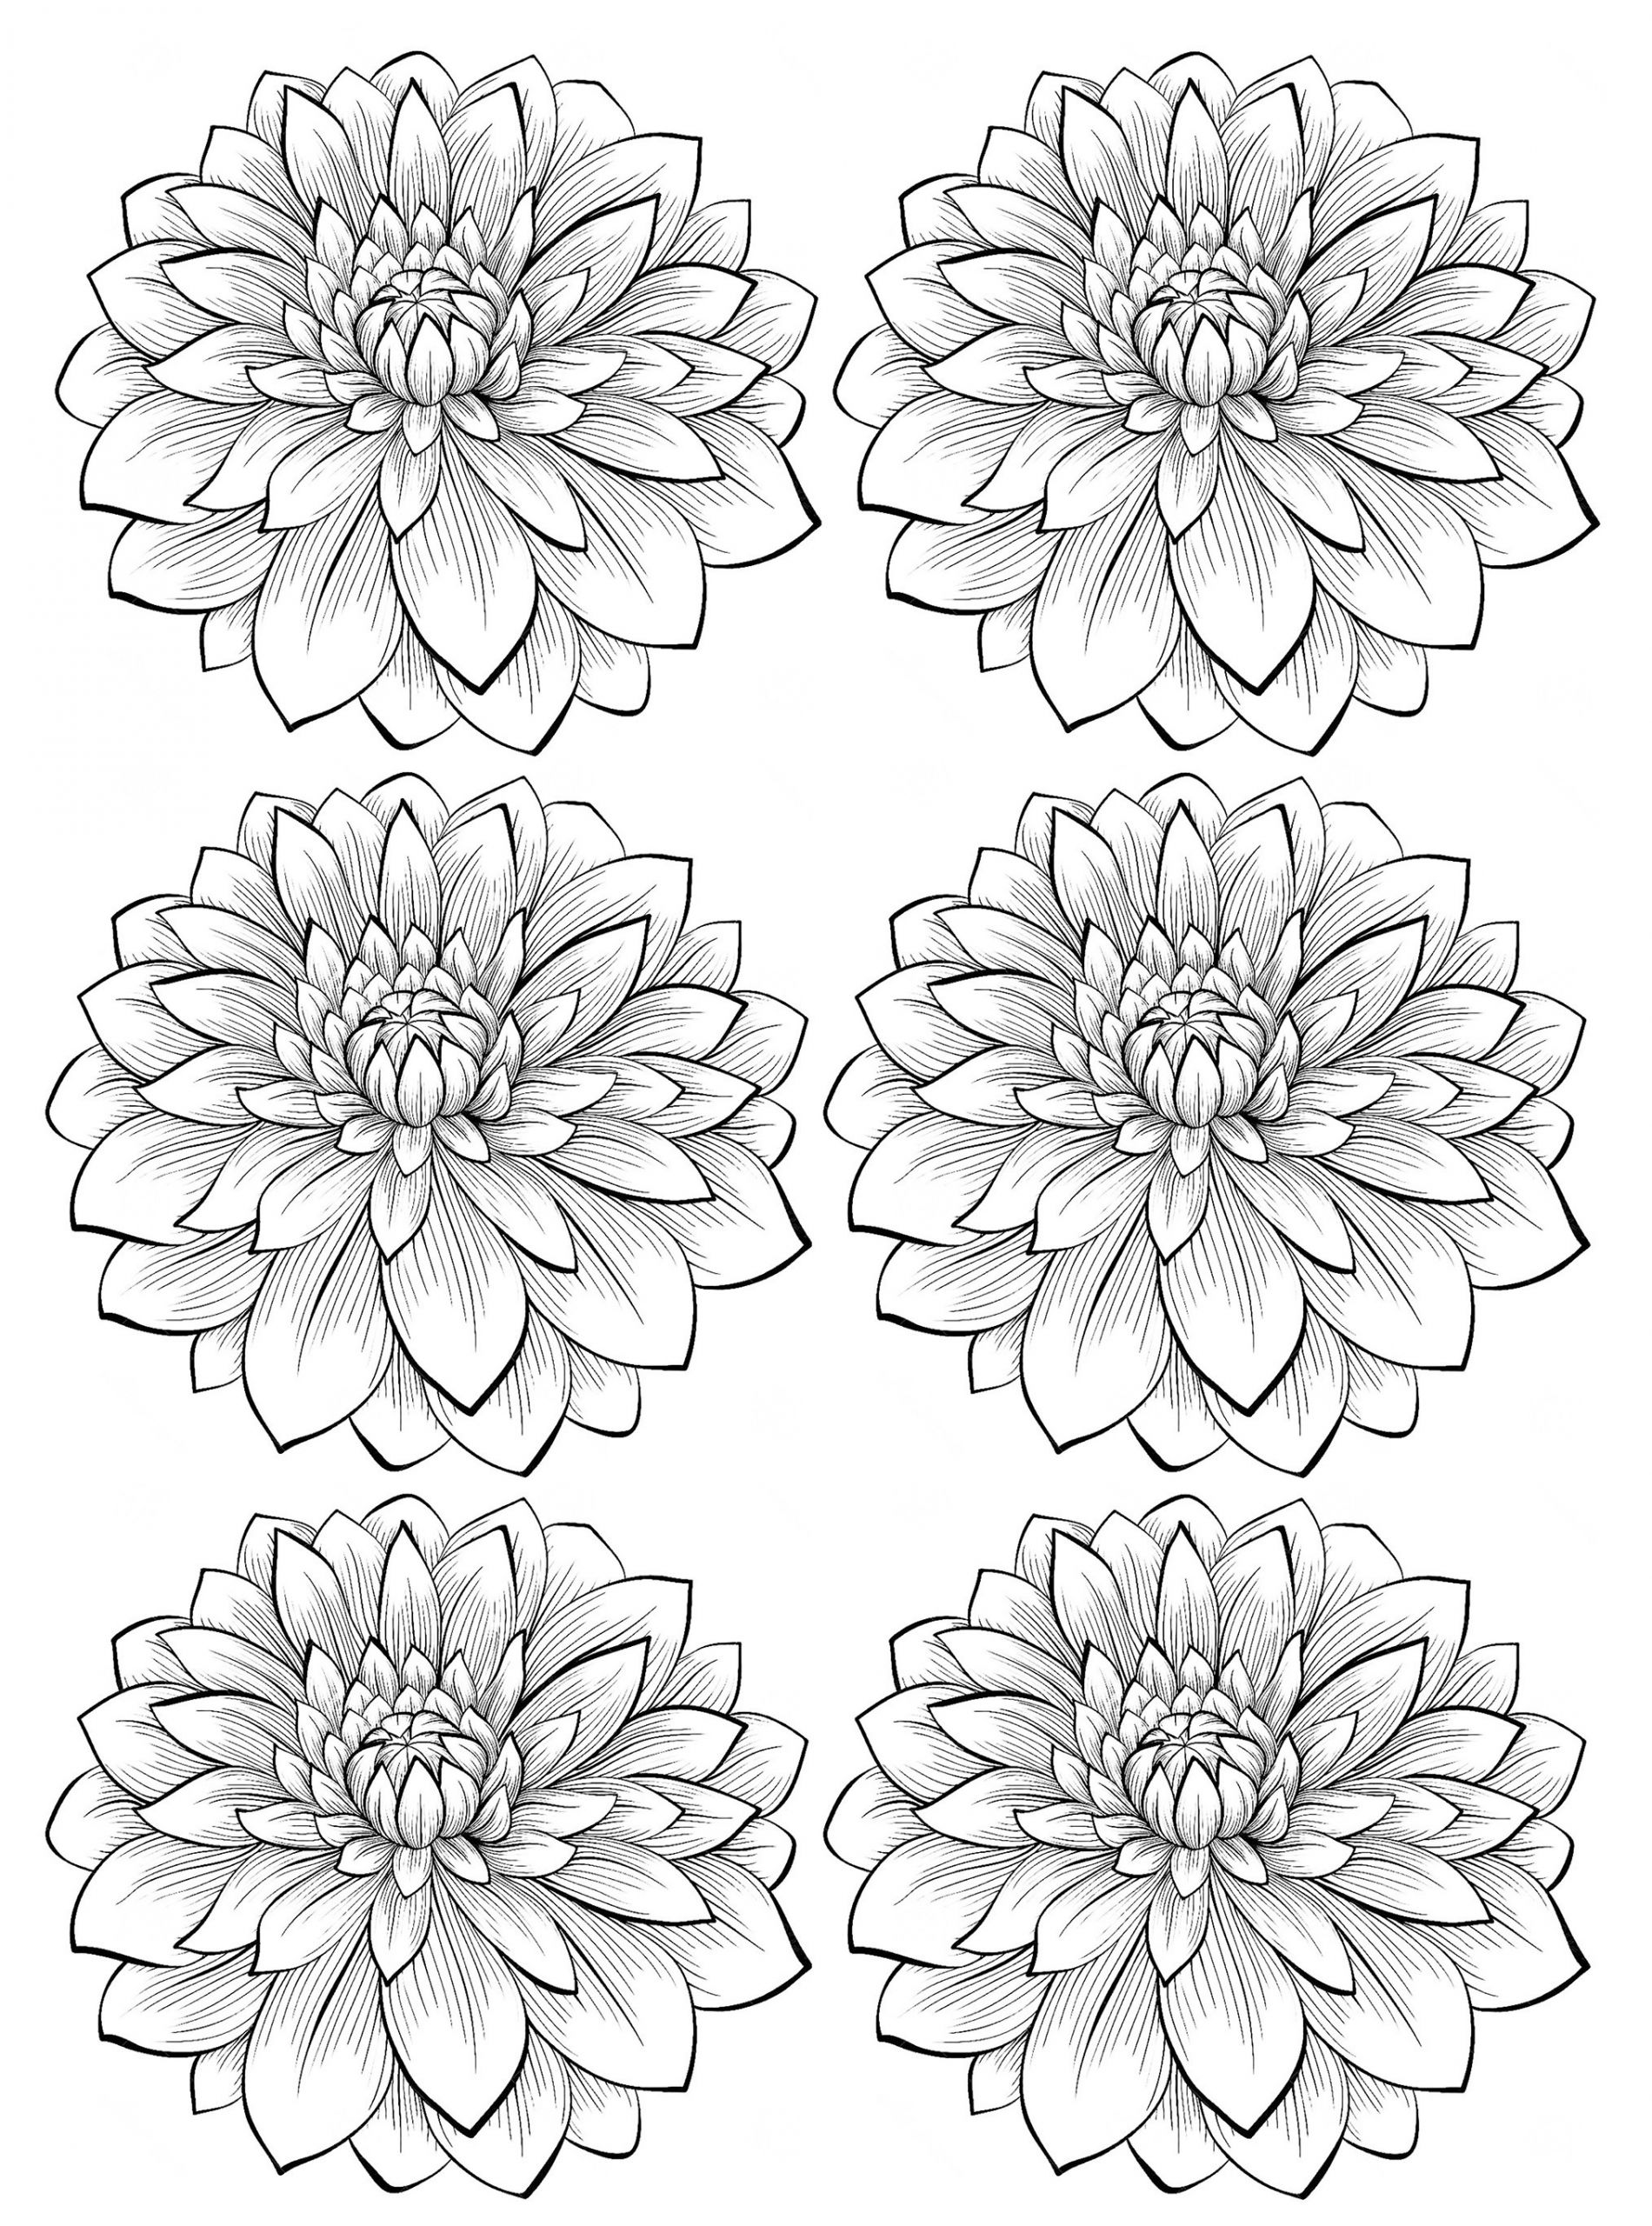 Flowers Coloring Pages For Adults
 Six dahlia flower Flowers Adult Coloring Pages